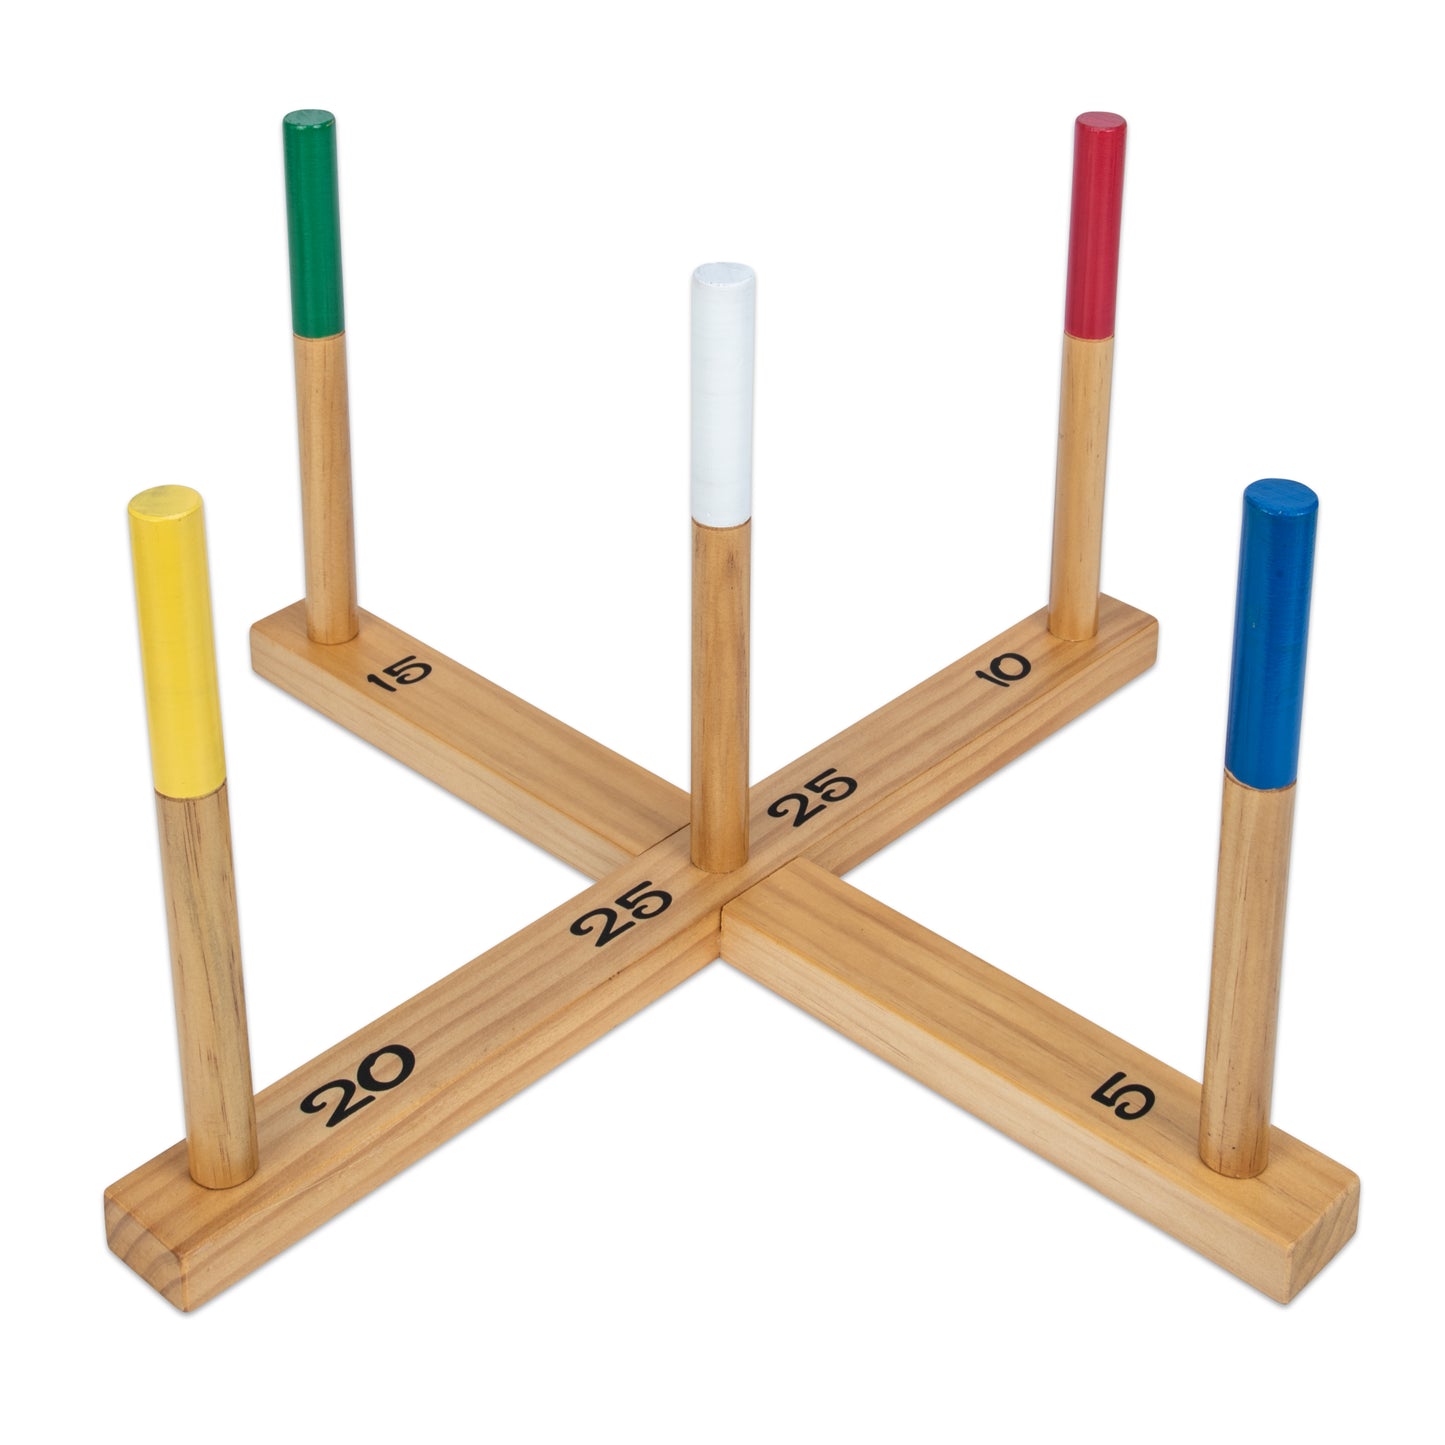 Wooden Ring Toss with 5 Colour Hemp Rings for up-to 5 Players